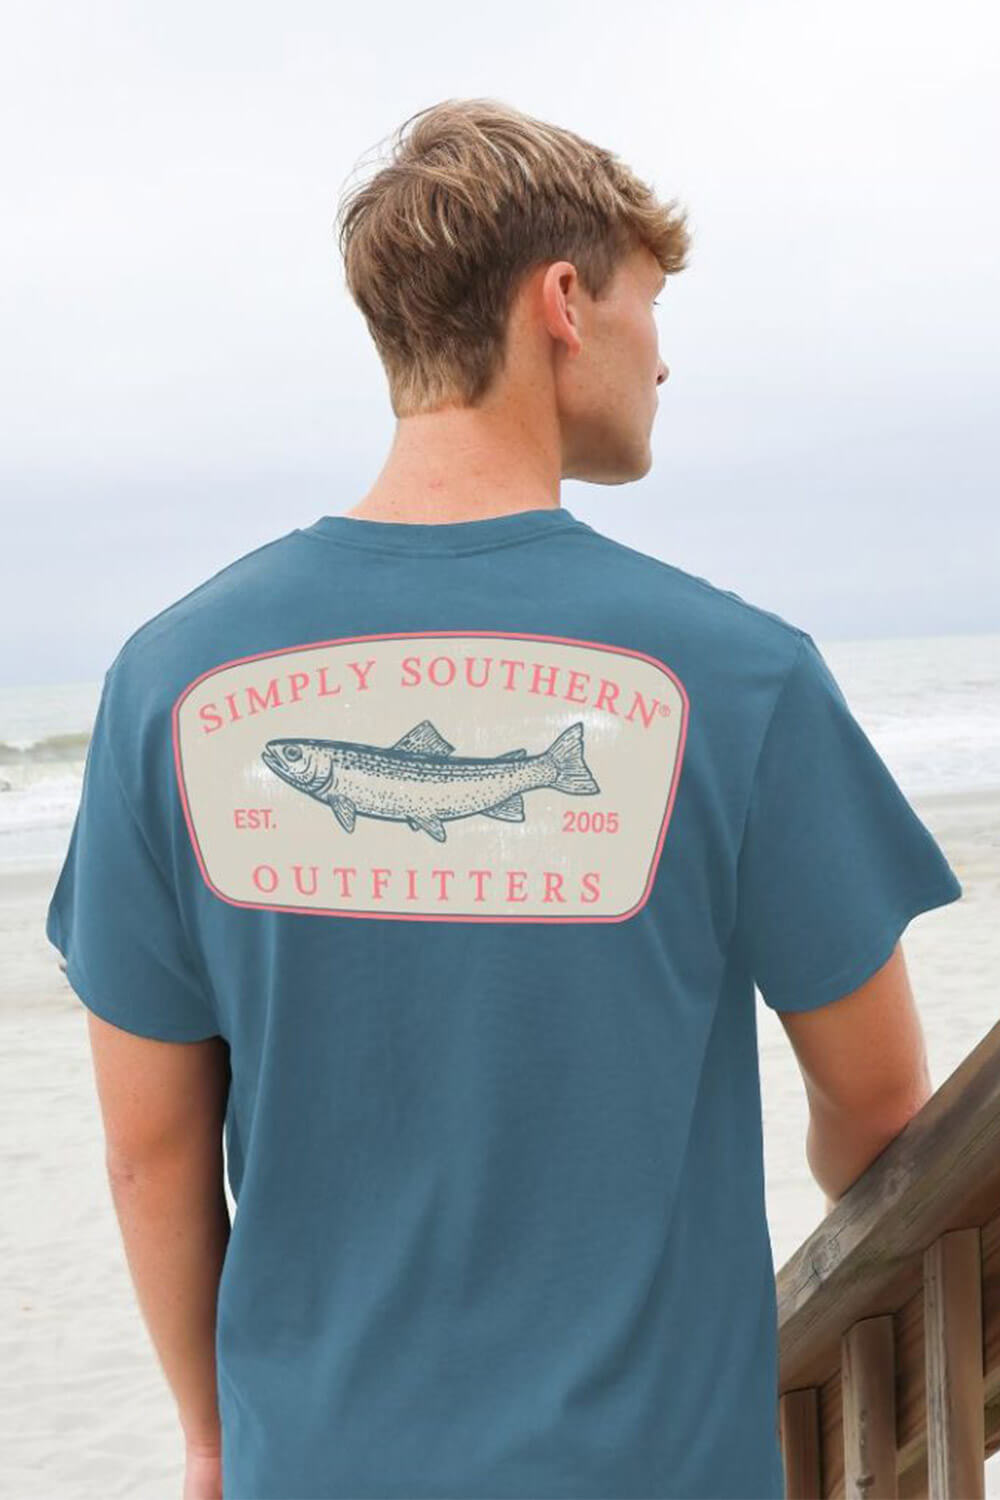 Simply southern: Fish Logo Comet S